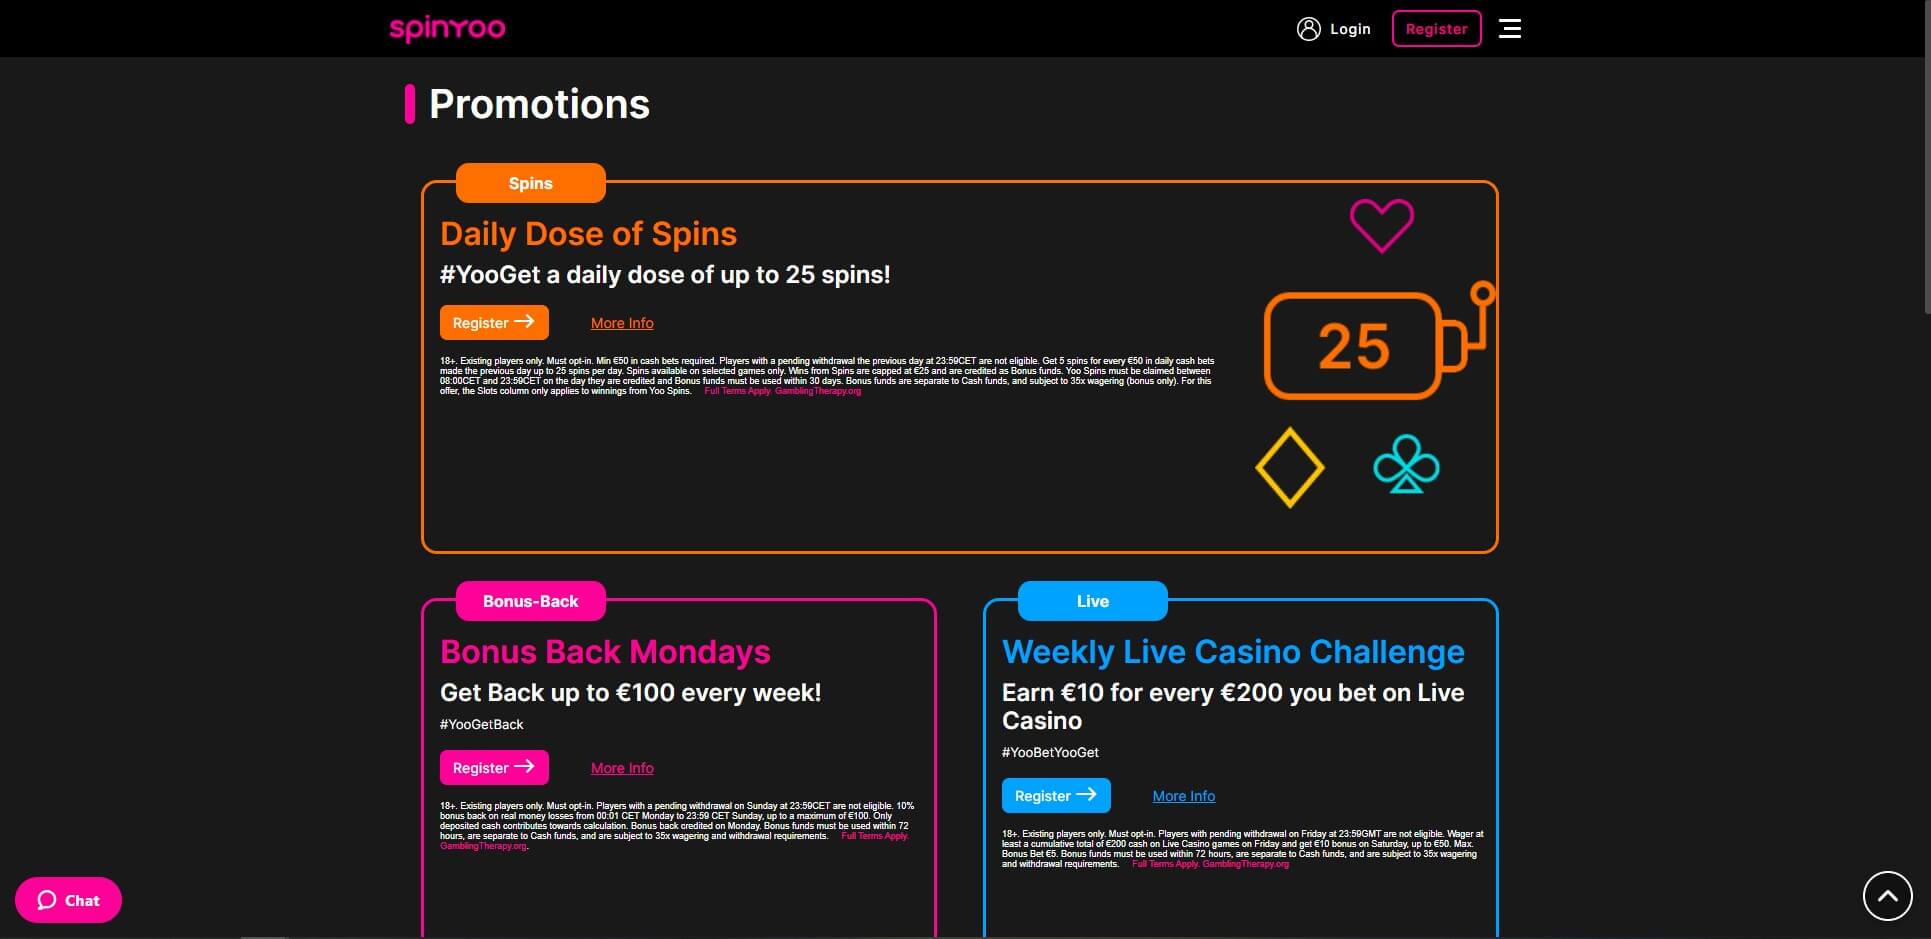 Promotions at Spinyoo Casino